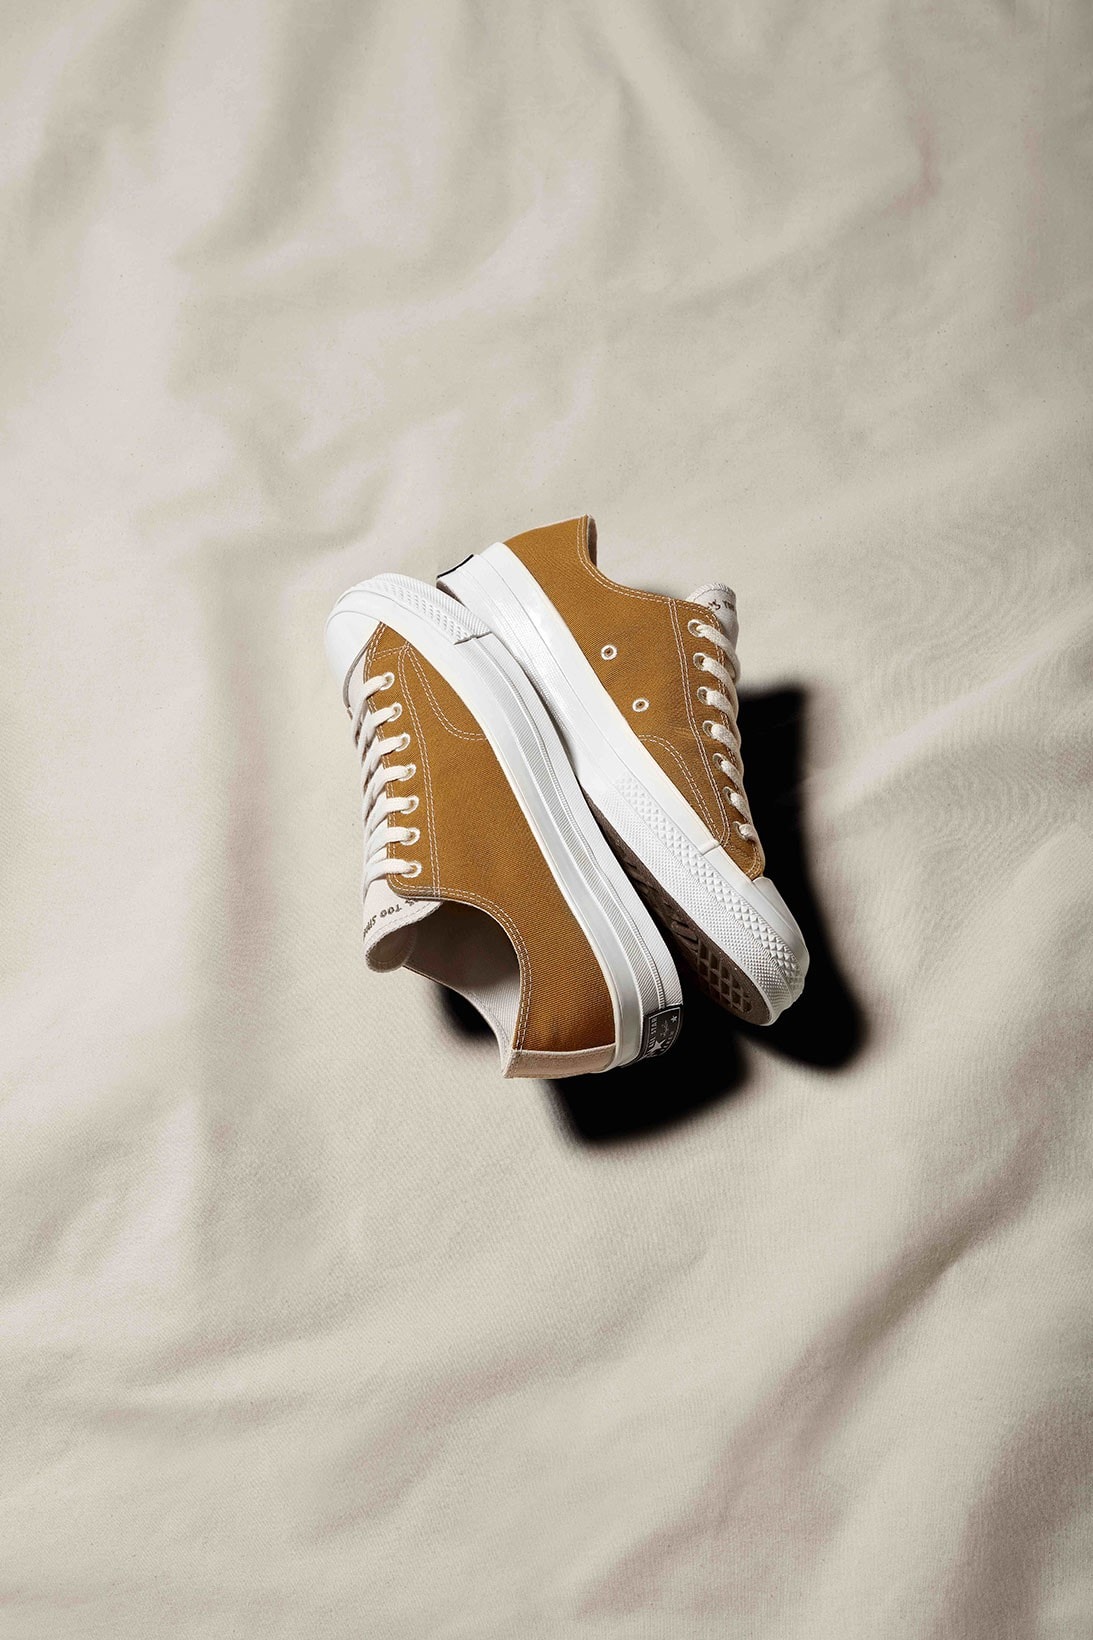 converse chuck Taylor all star made from sustainability plastic